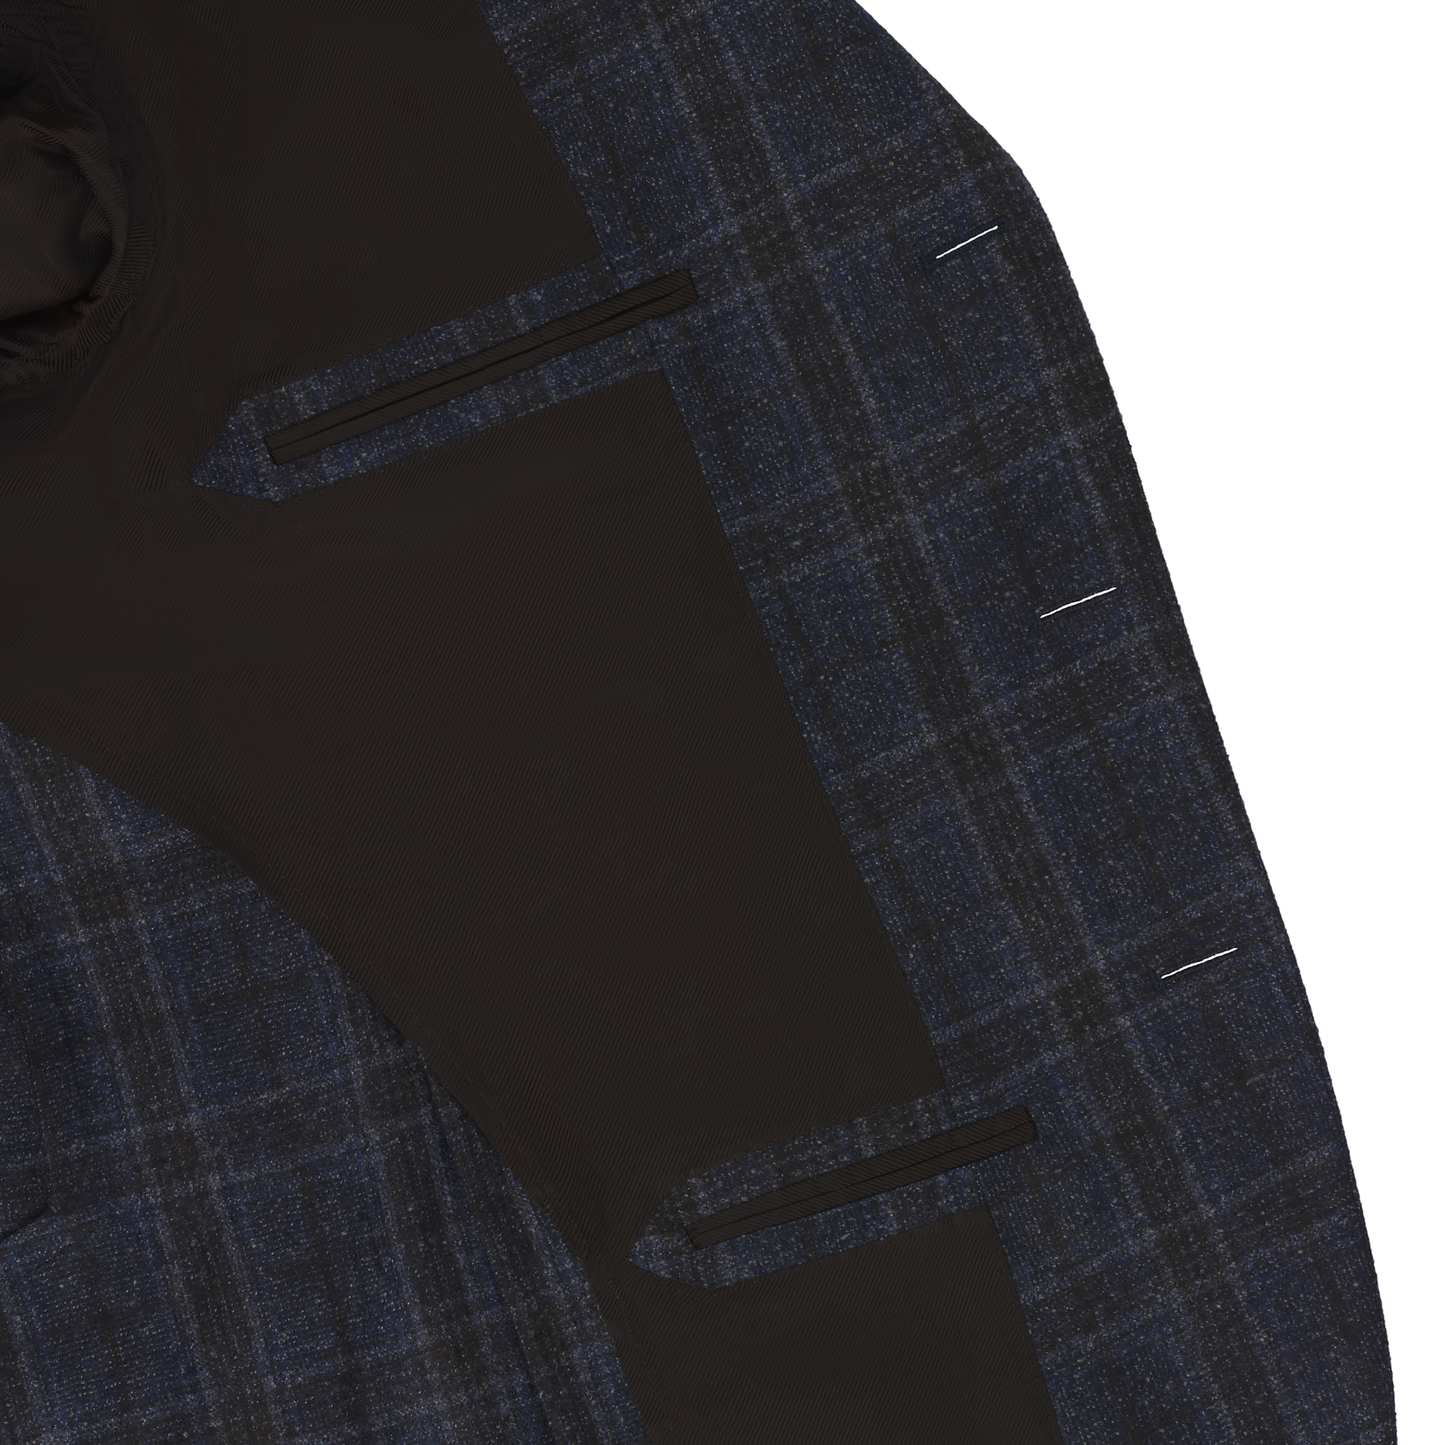 De Petrillo Single-Breasted Plaid Check Wool Jacket in Dark Blue. Exclusively Made for Sartale - SARTALE